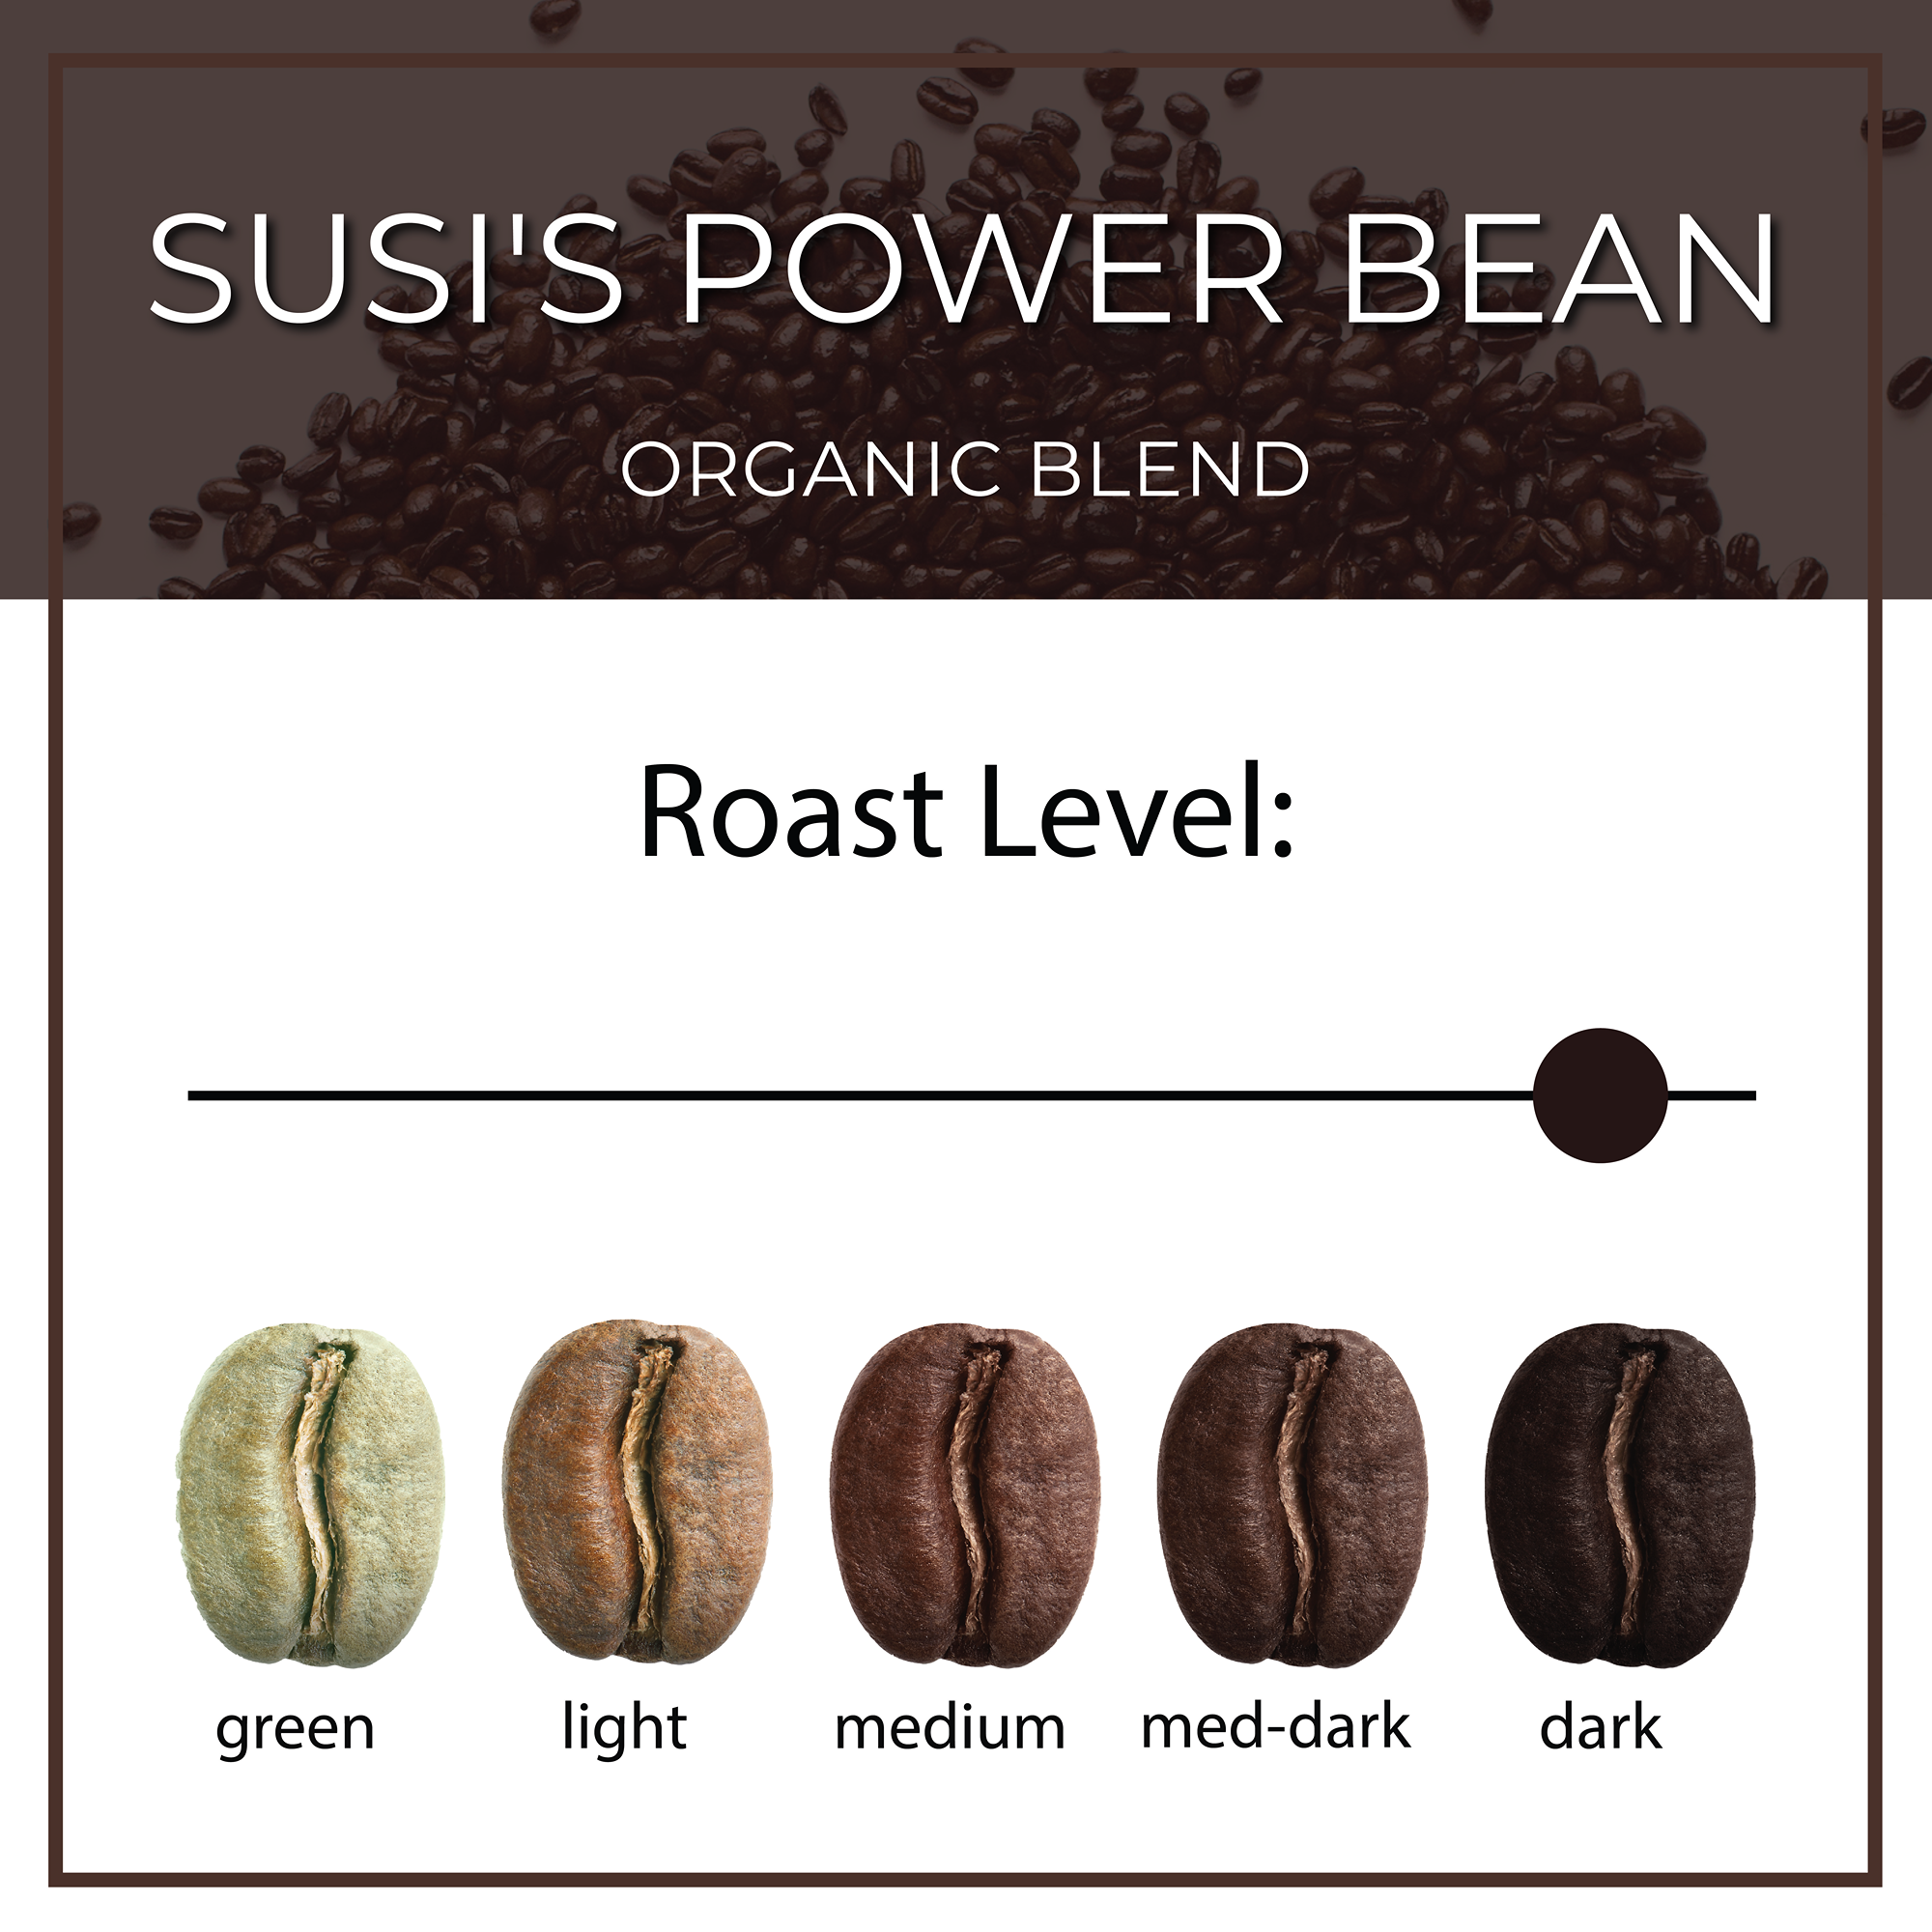 29 Types Of Coffee Beans From A to Z (And How To Use Them)